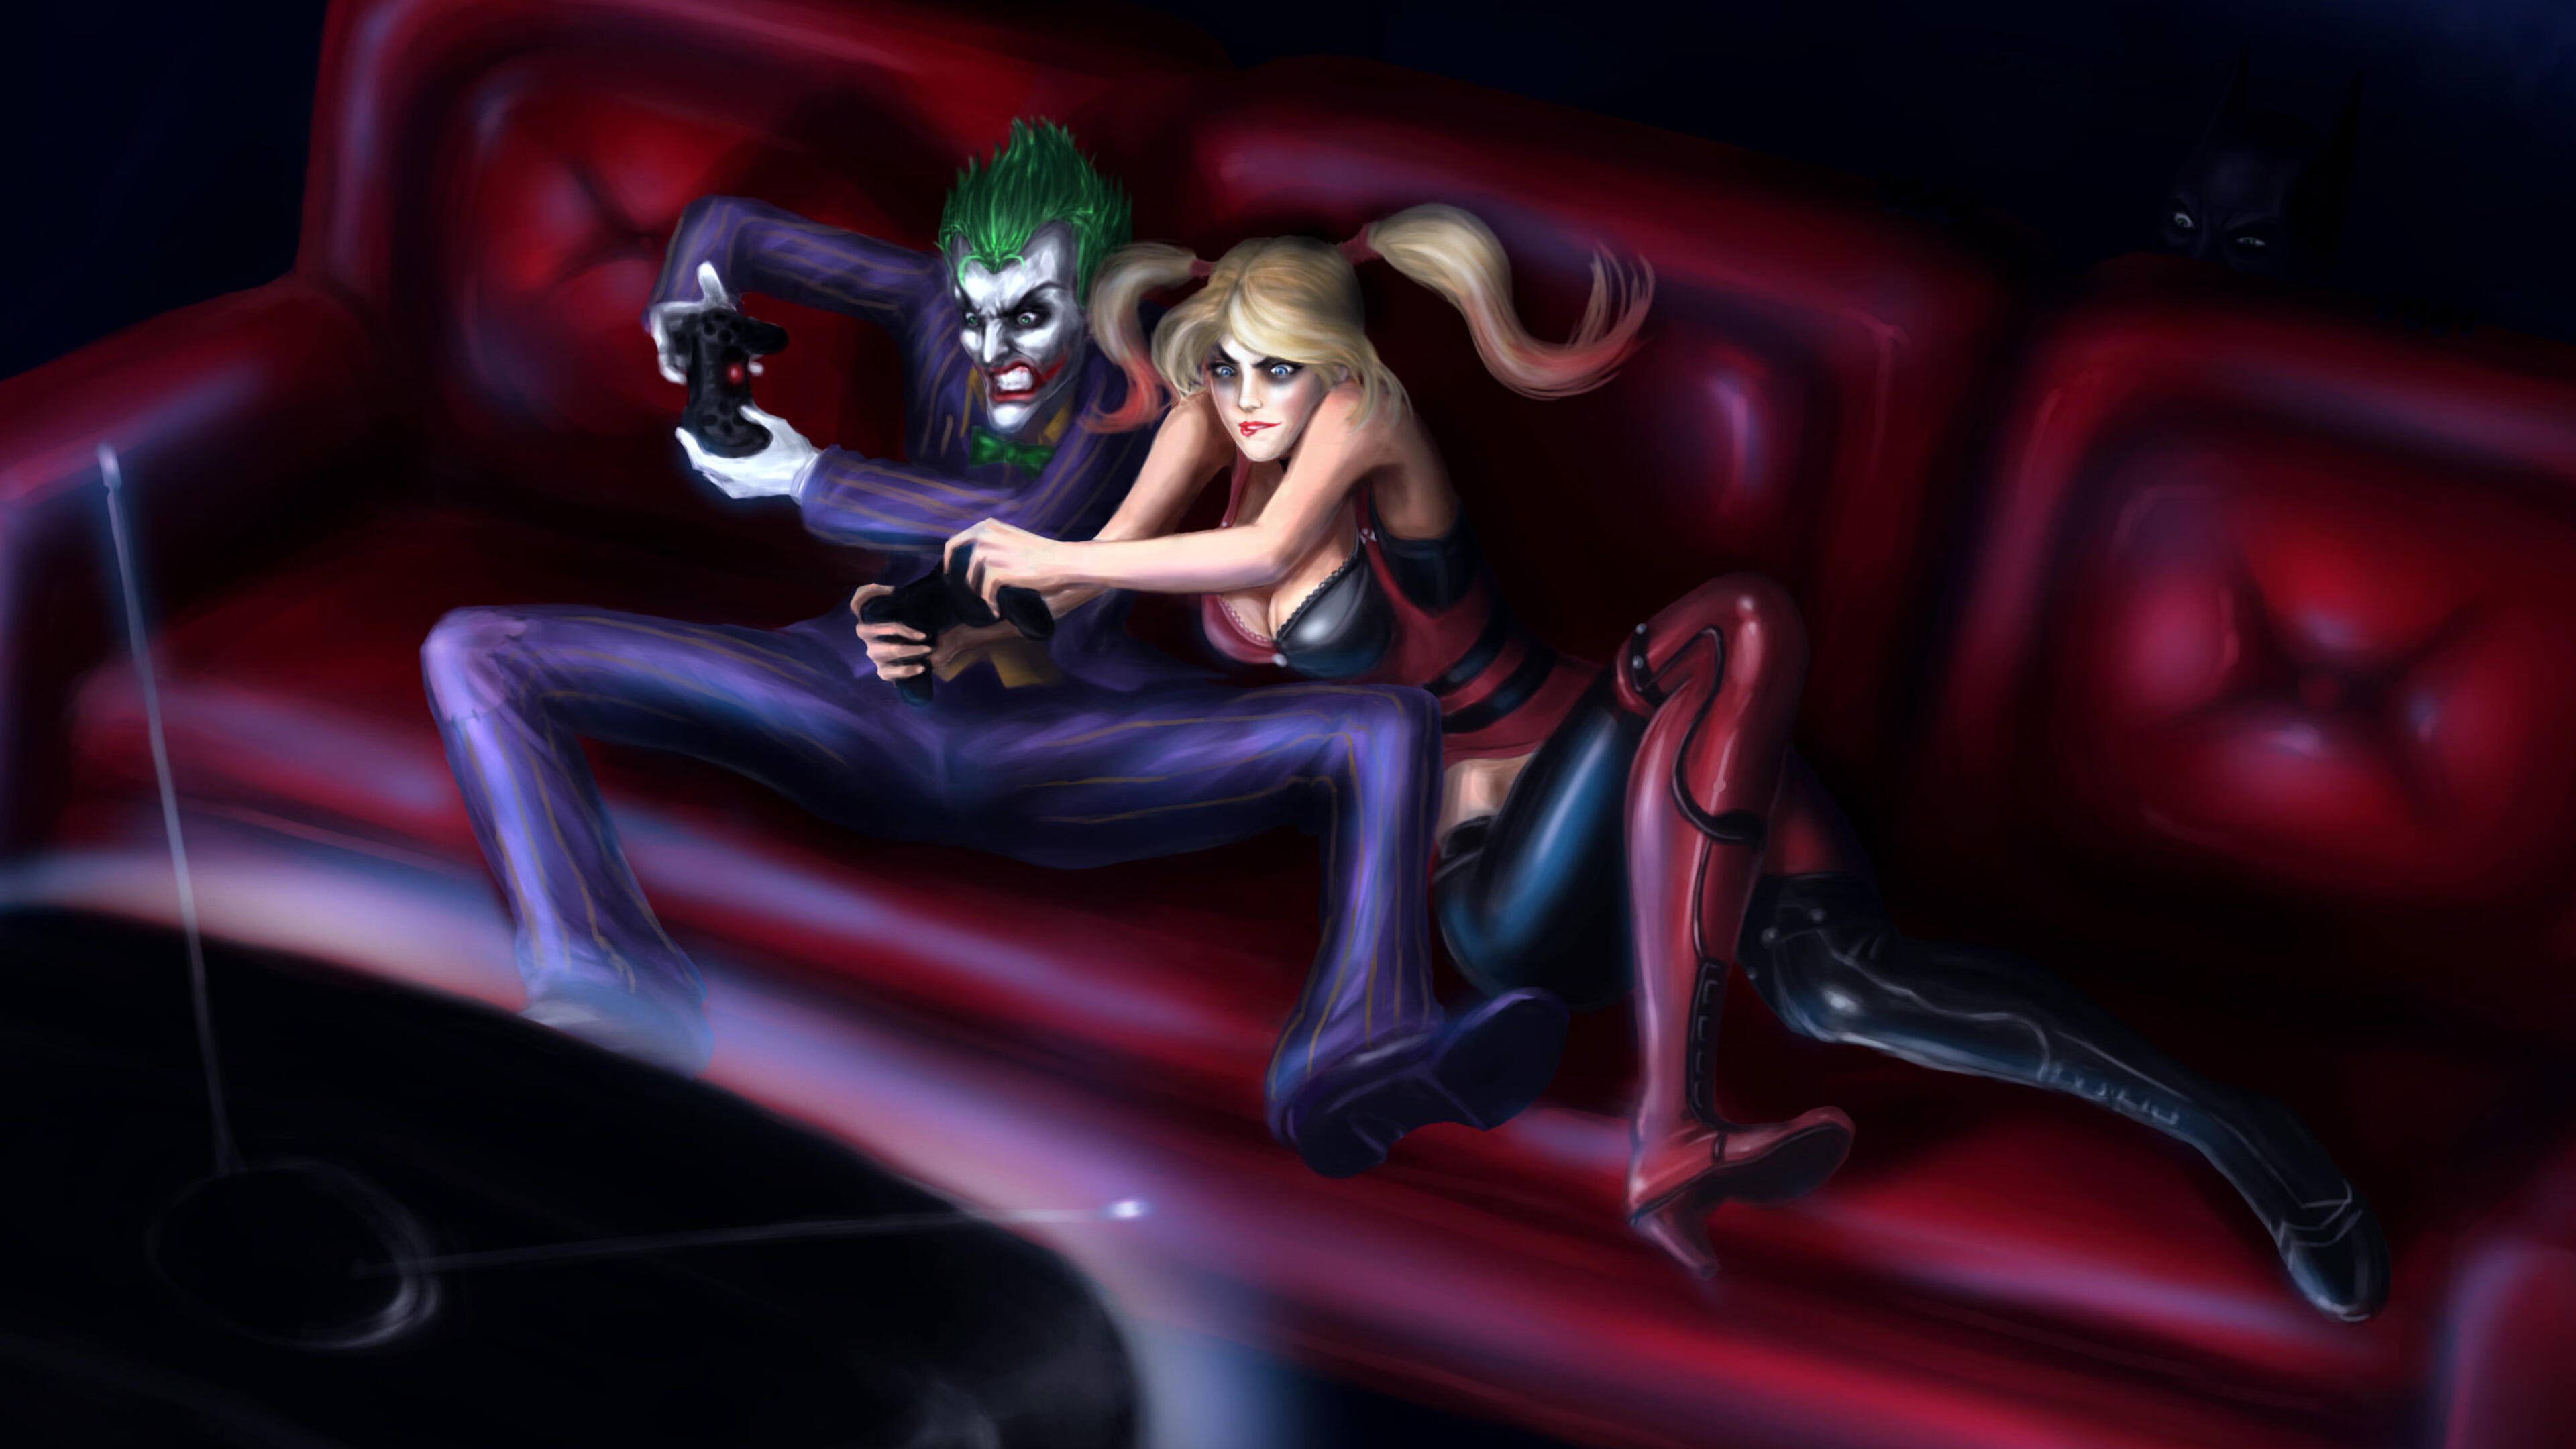 harley-and-joker-playing-games-zx.jpg. 